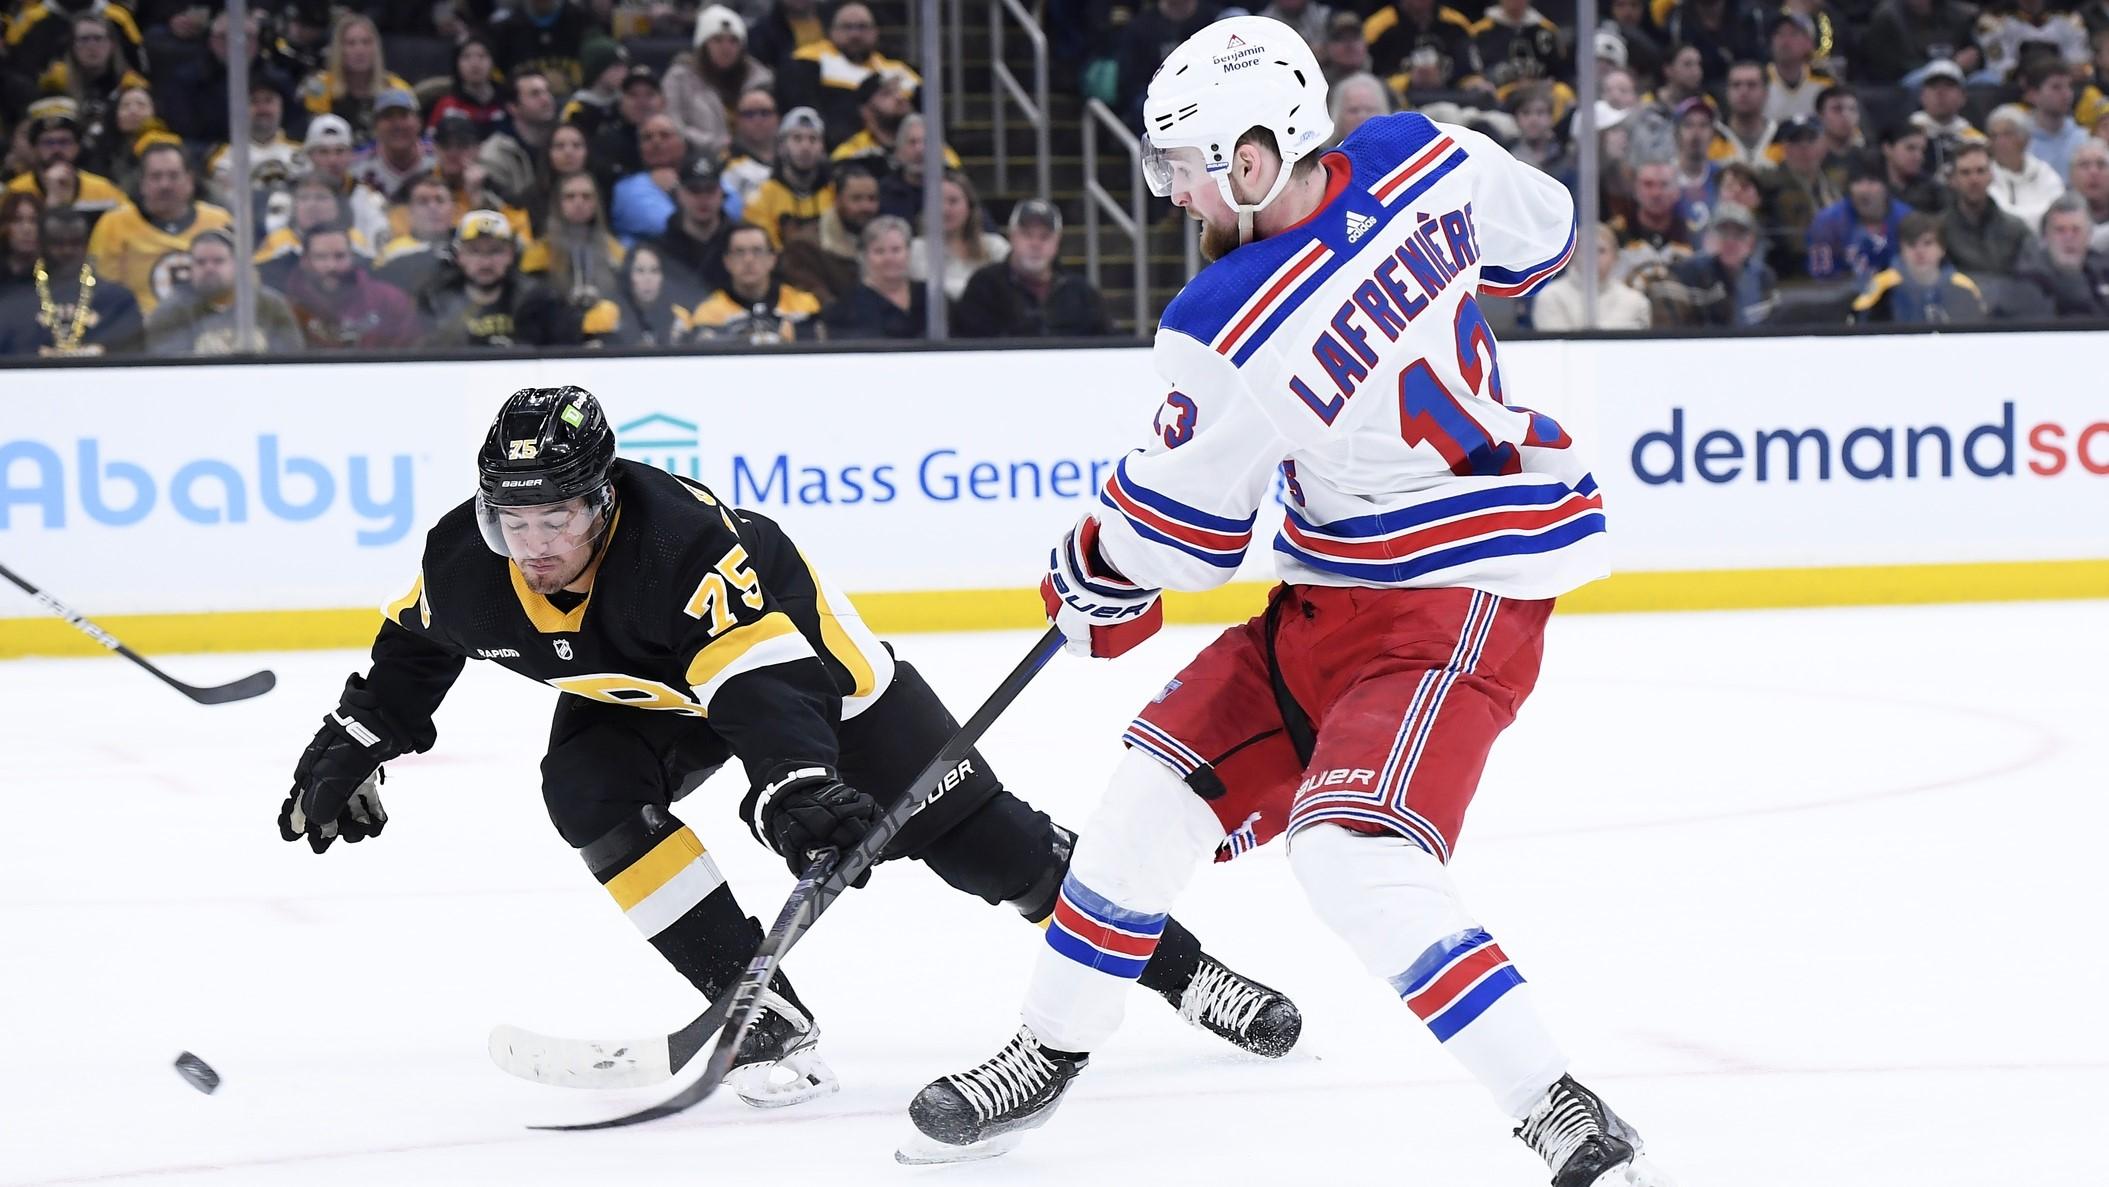 Mar 4, 2023; Boston, Massachusetts, USA; New York Rangers left wing Alexis Lafreniere (13) shoots the puck while Boston Bruins defenseman Connor Clifton (75) defends during the second period at TD Garden. / Bob DeChiara-USA TODAY Sports